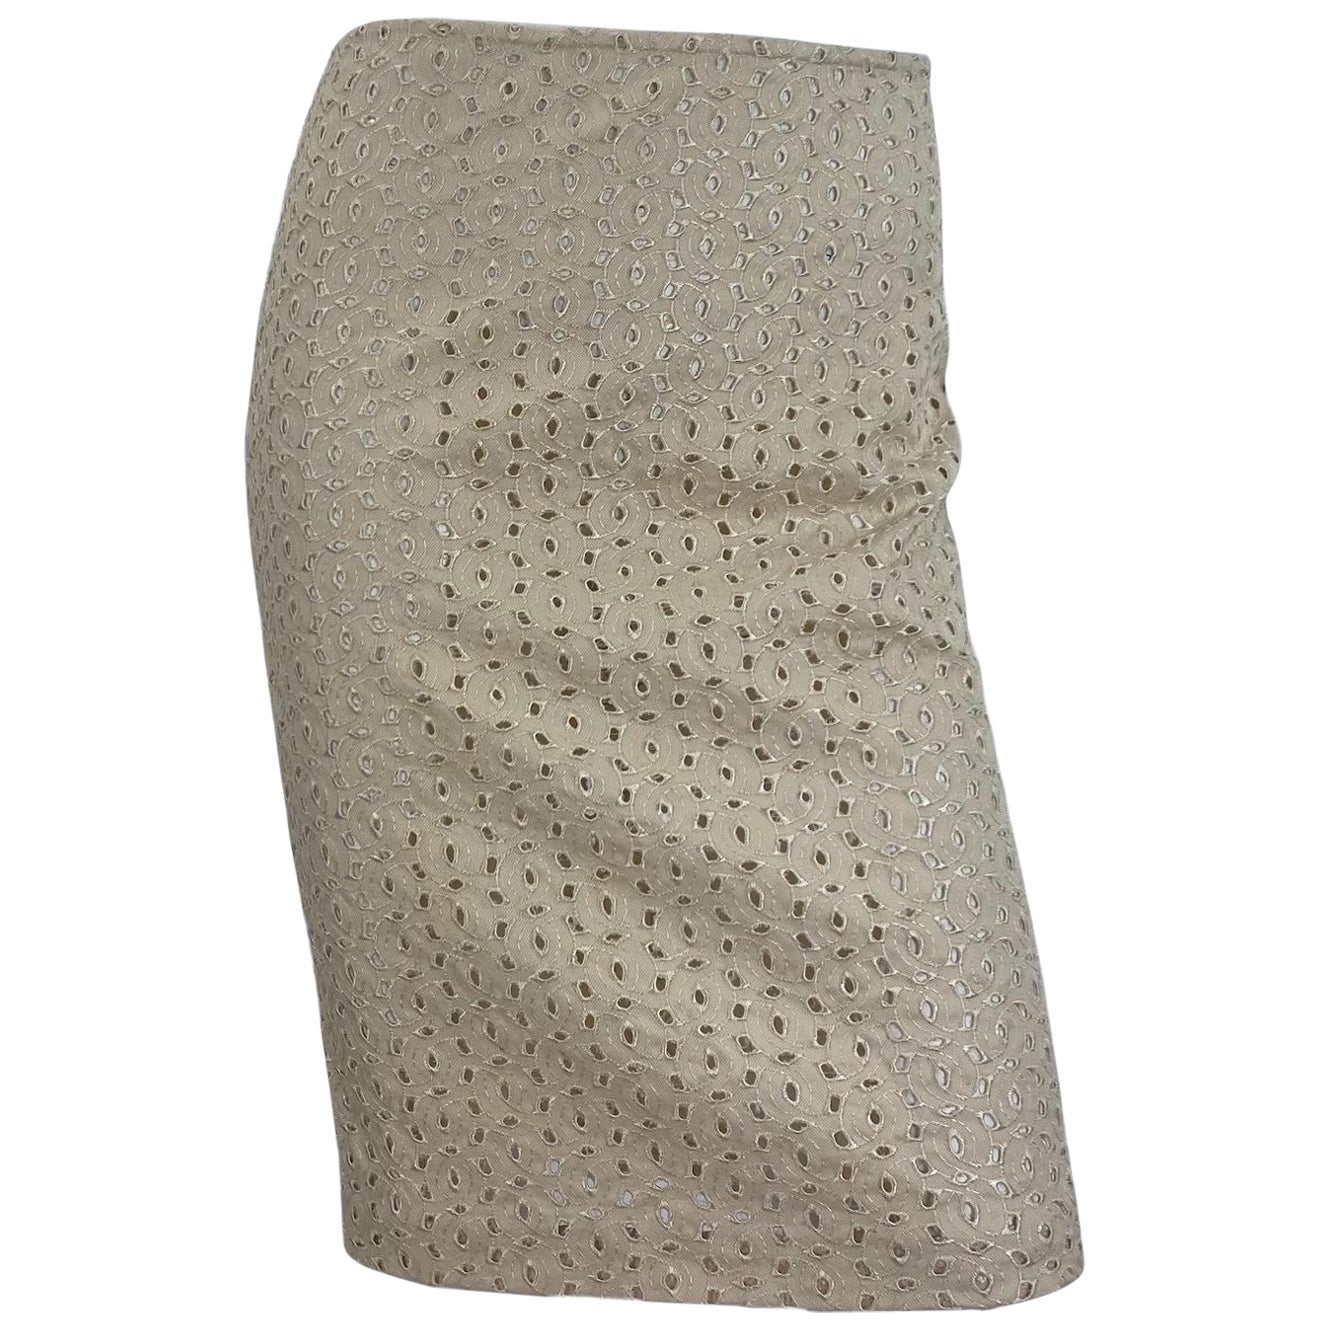  Vintage Gianni Versace Couture S/S 2002 Nude Eyelet Pencil Skirt It 38 - US 4 For Sale